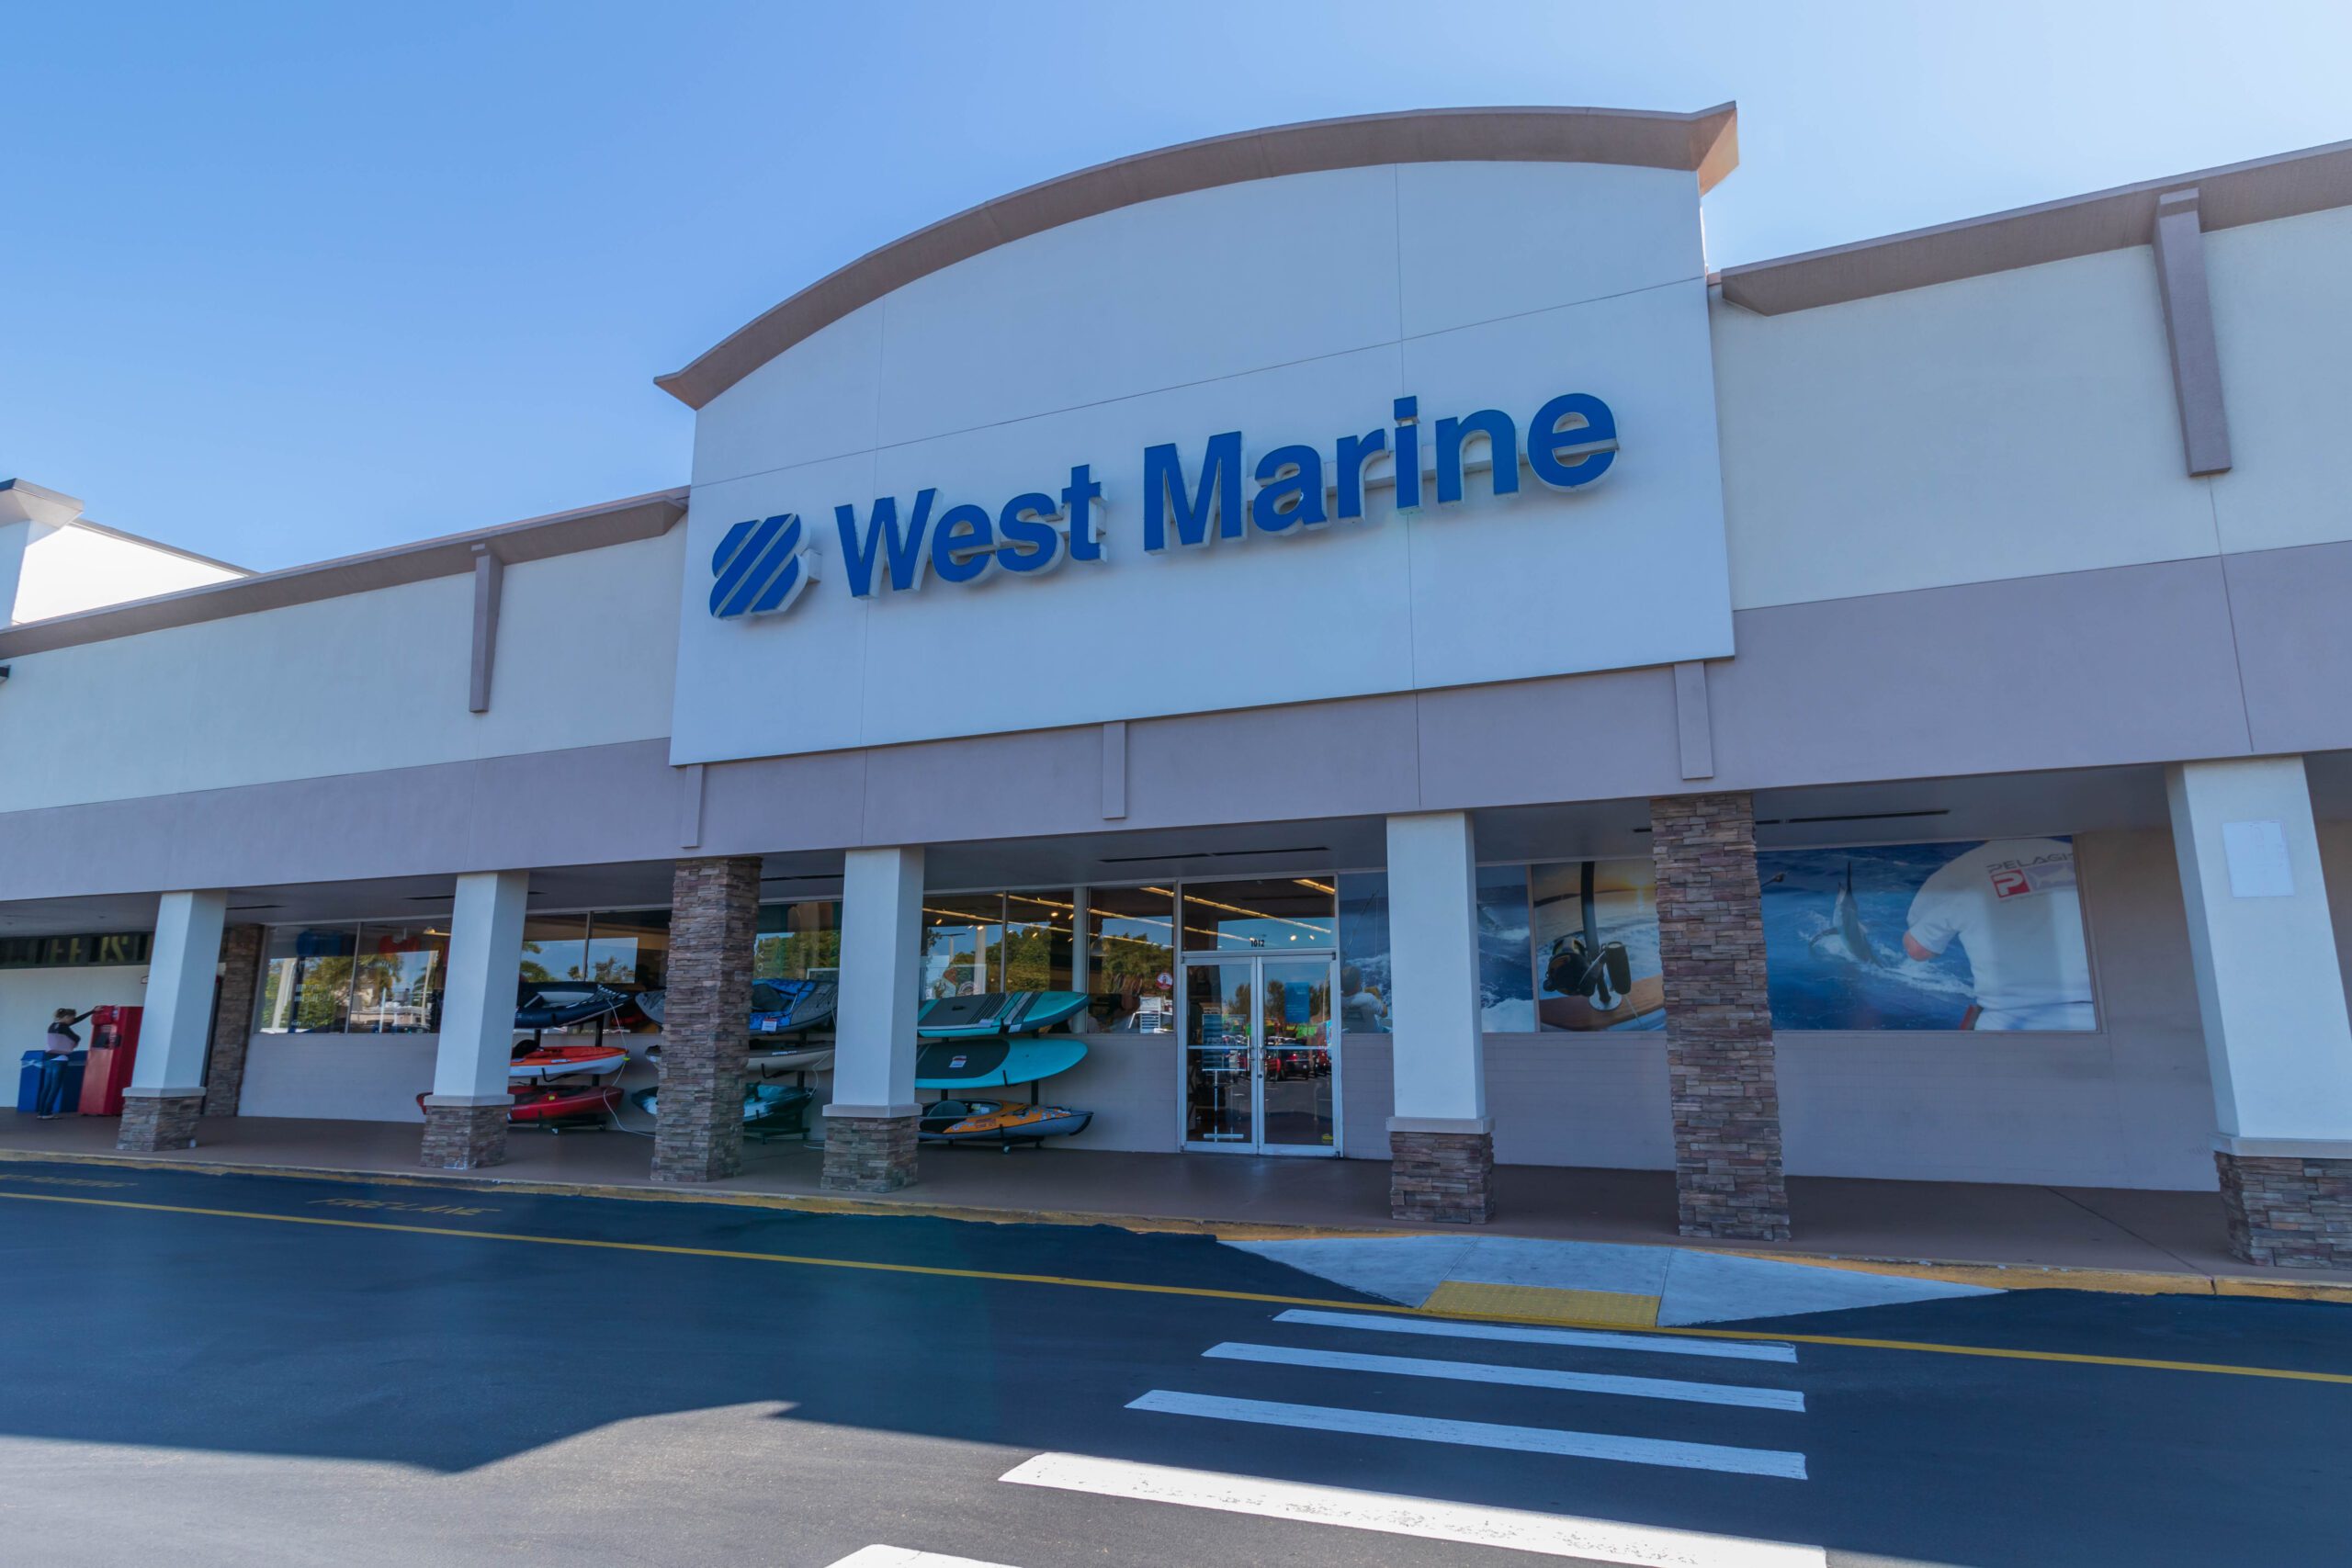 West Marine hires a well-known CMO